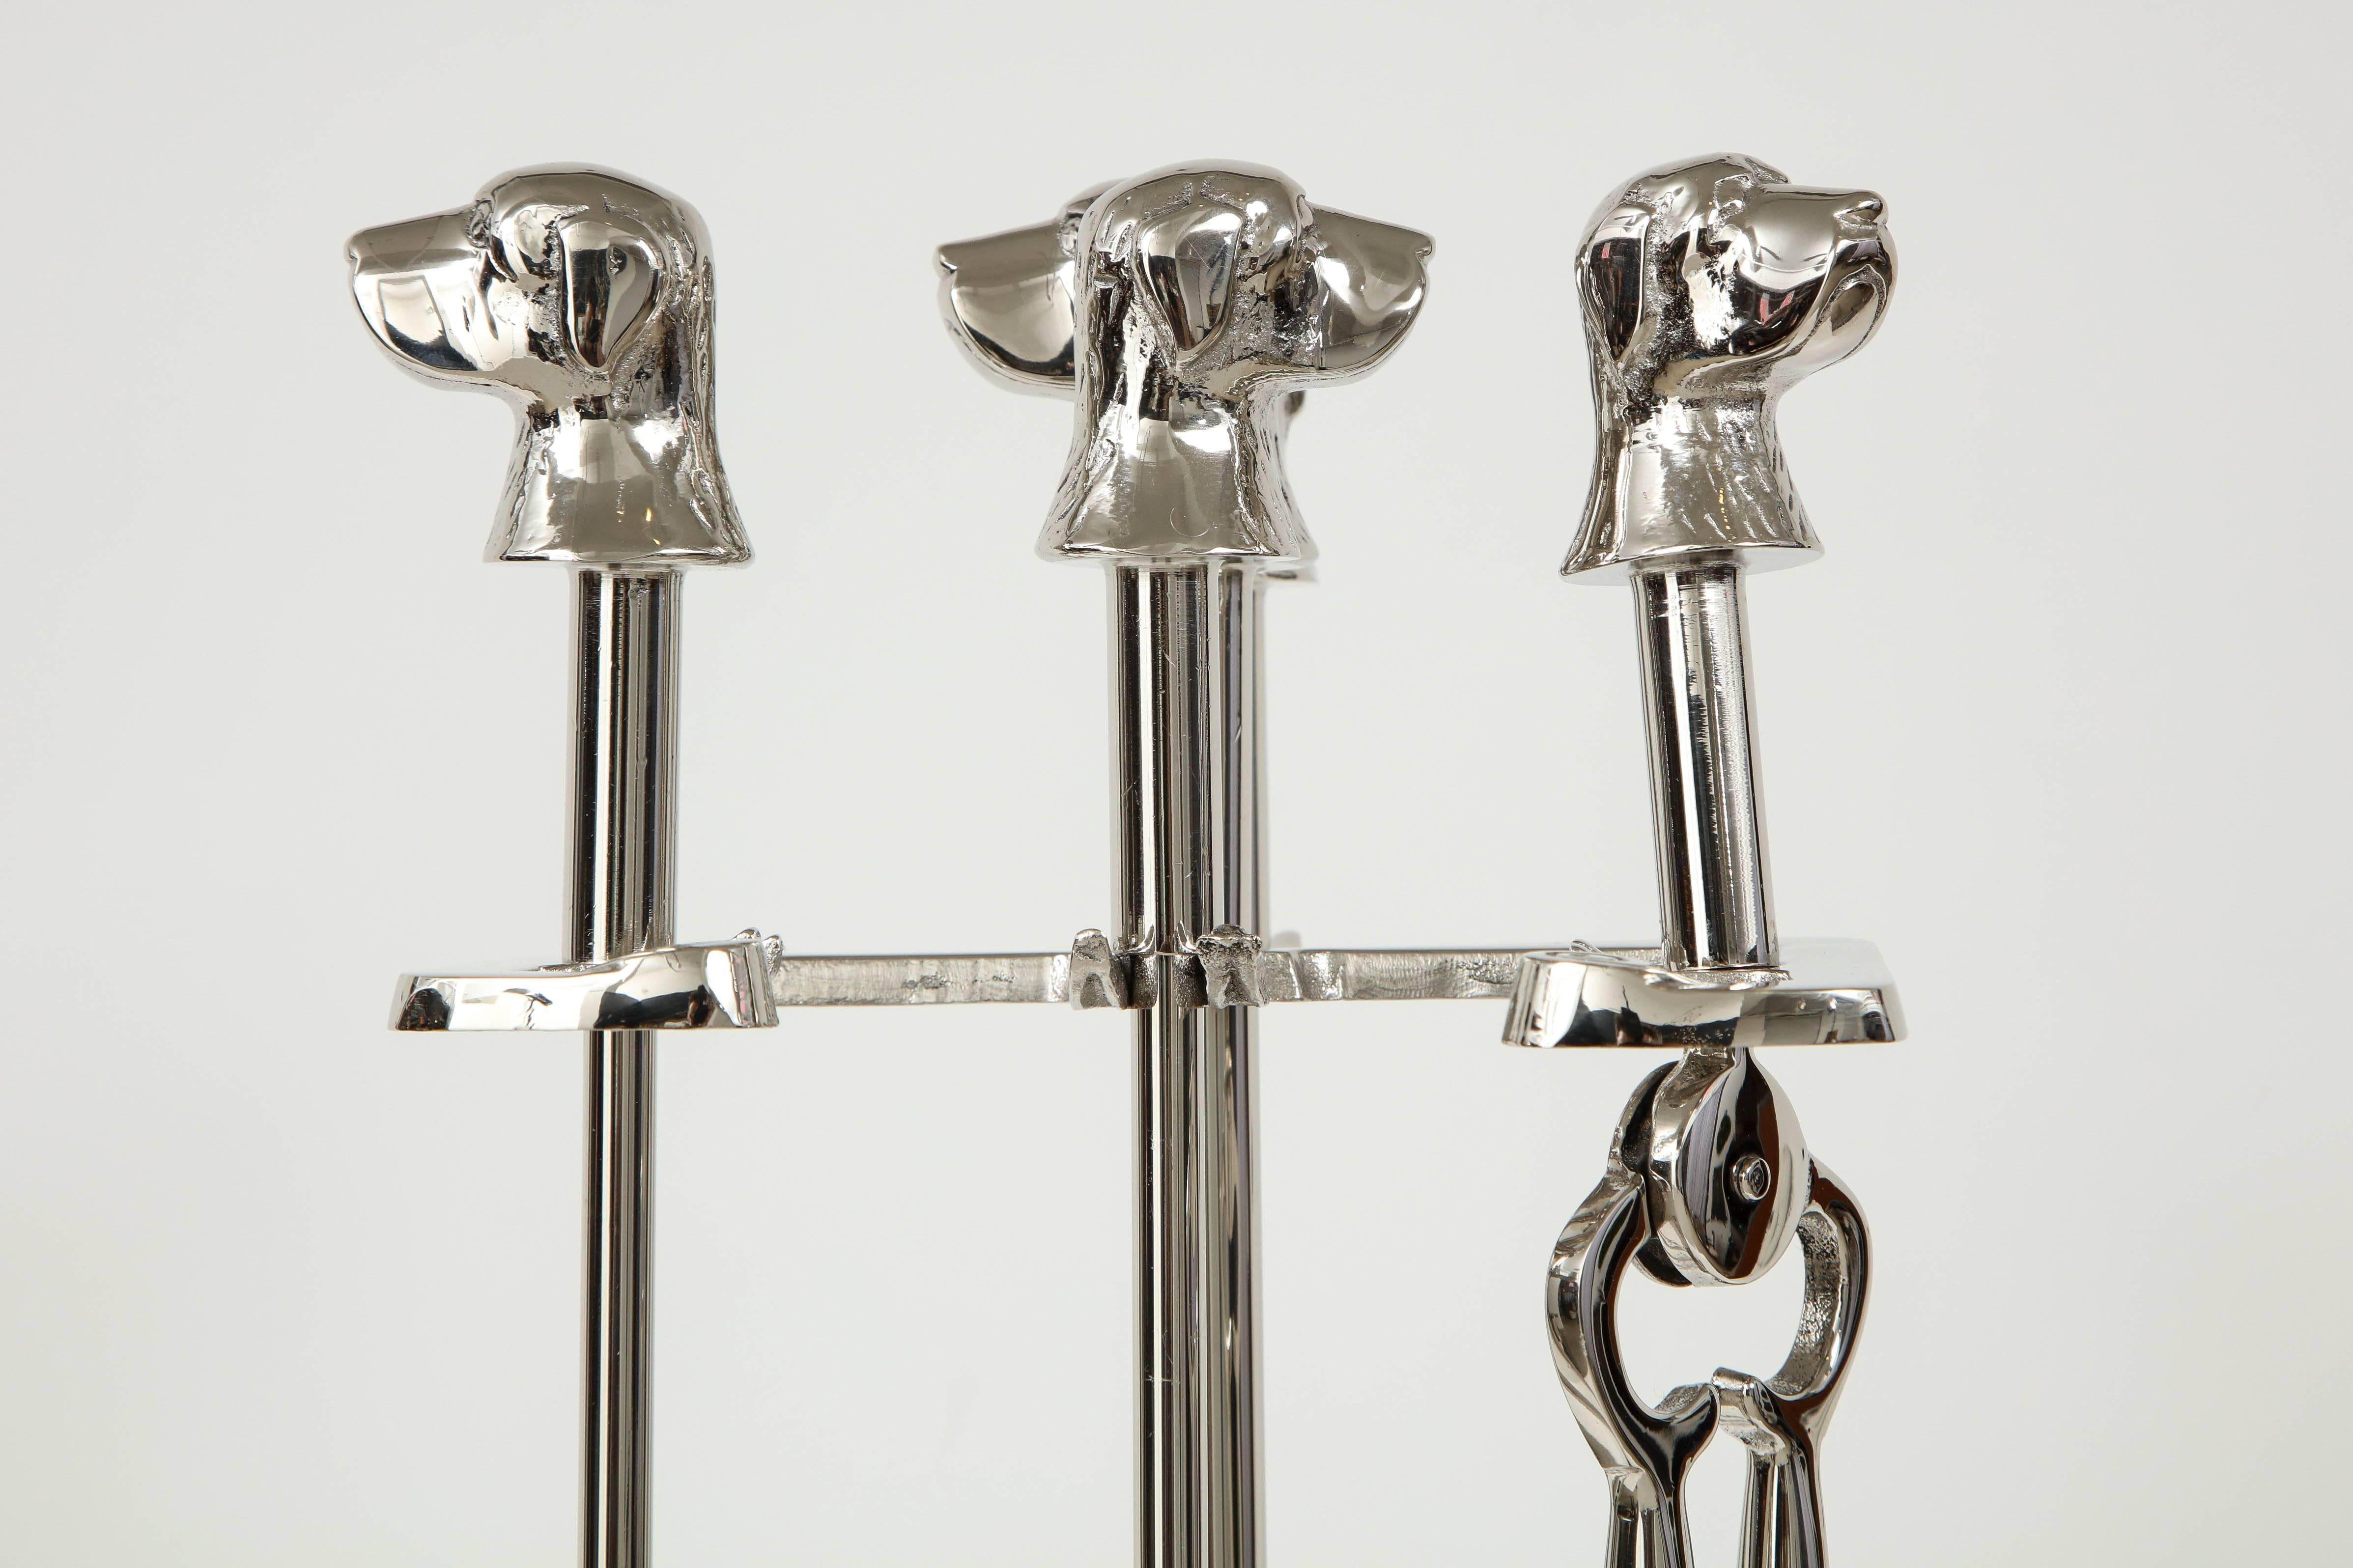 Set of Art Deco polished nickel fire tools with stylized dog head finials, most likely retriever or labrador breed. Set includes stand, shovel, poker, tongs, and broom.